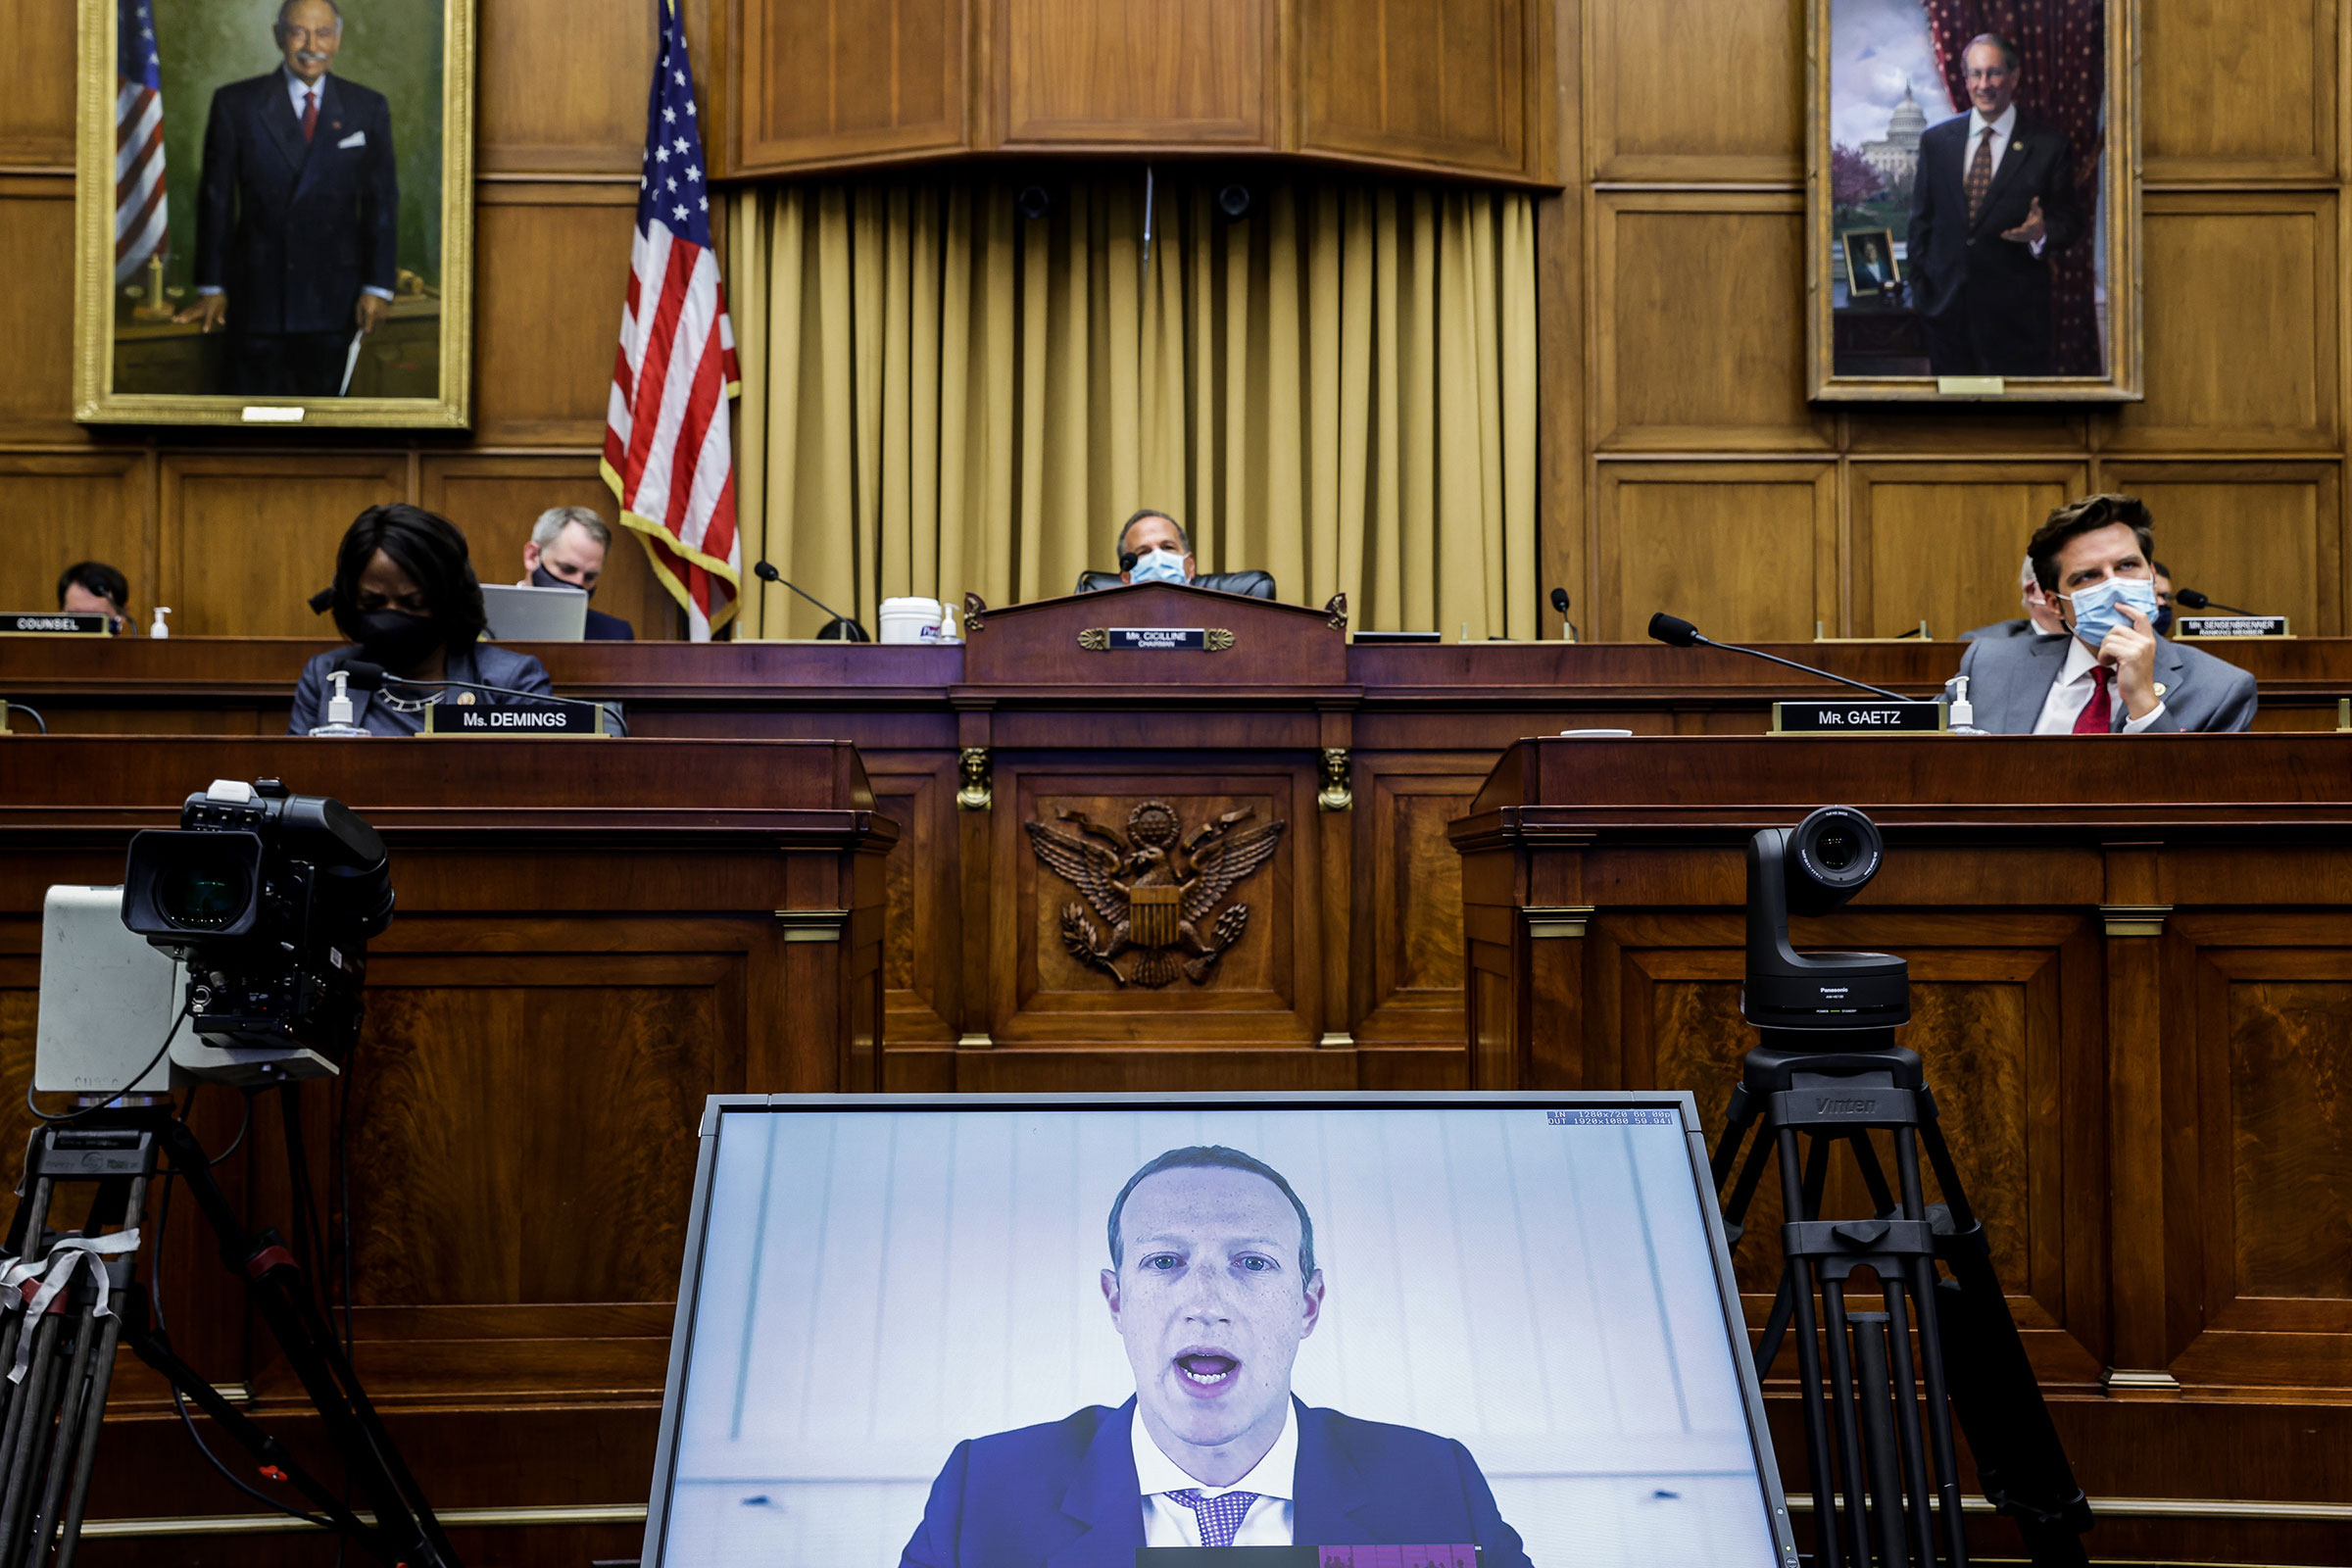 Facebook CEO Mark Zuckerberg speaks via video conference during the House Judiciary Subcommittee on Antitrust on Capitol Hill in Washington on July 29, 2020. (Graeme Jennings—Pool/Getty Images)